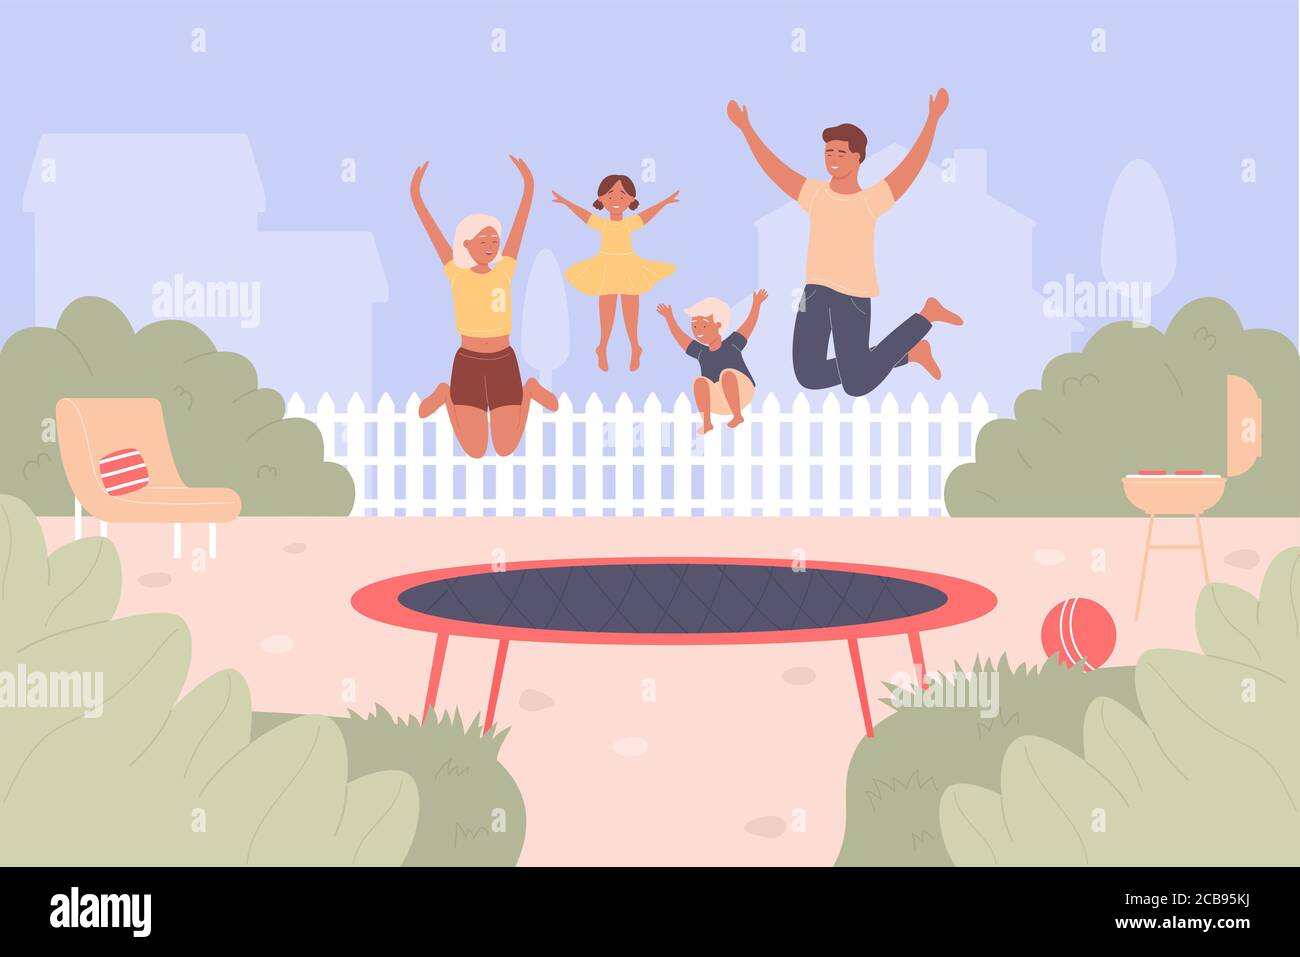 Trampoline jumping vector illustration. Cartoon flat family people jump and have fun together, active happy jumper characters bounce high on trampoline. Summer leisure outdoor activity background Stock Vector